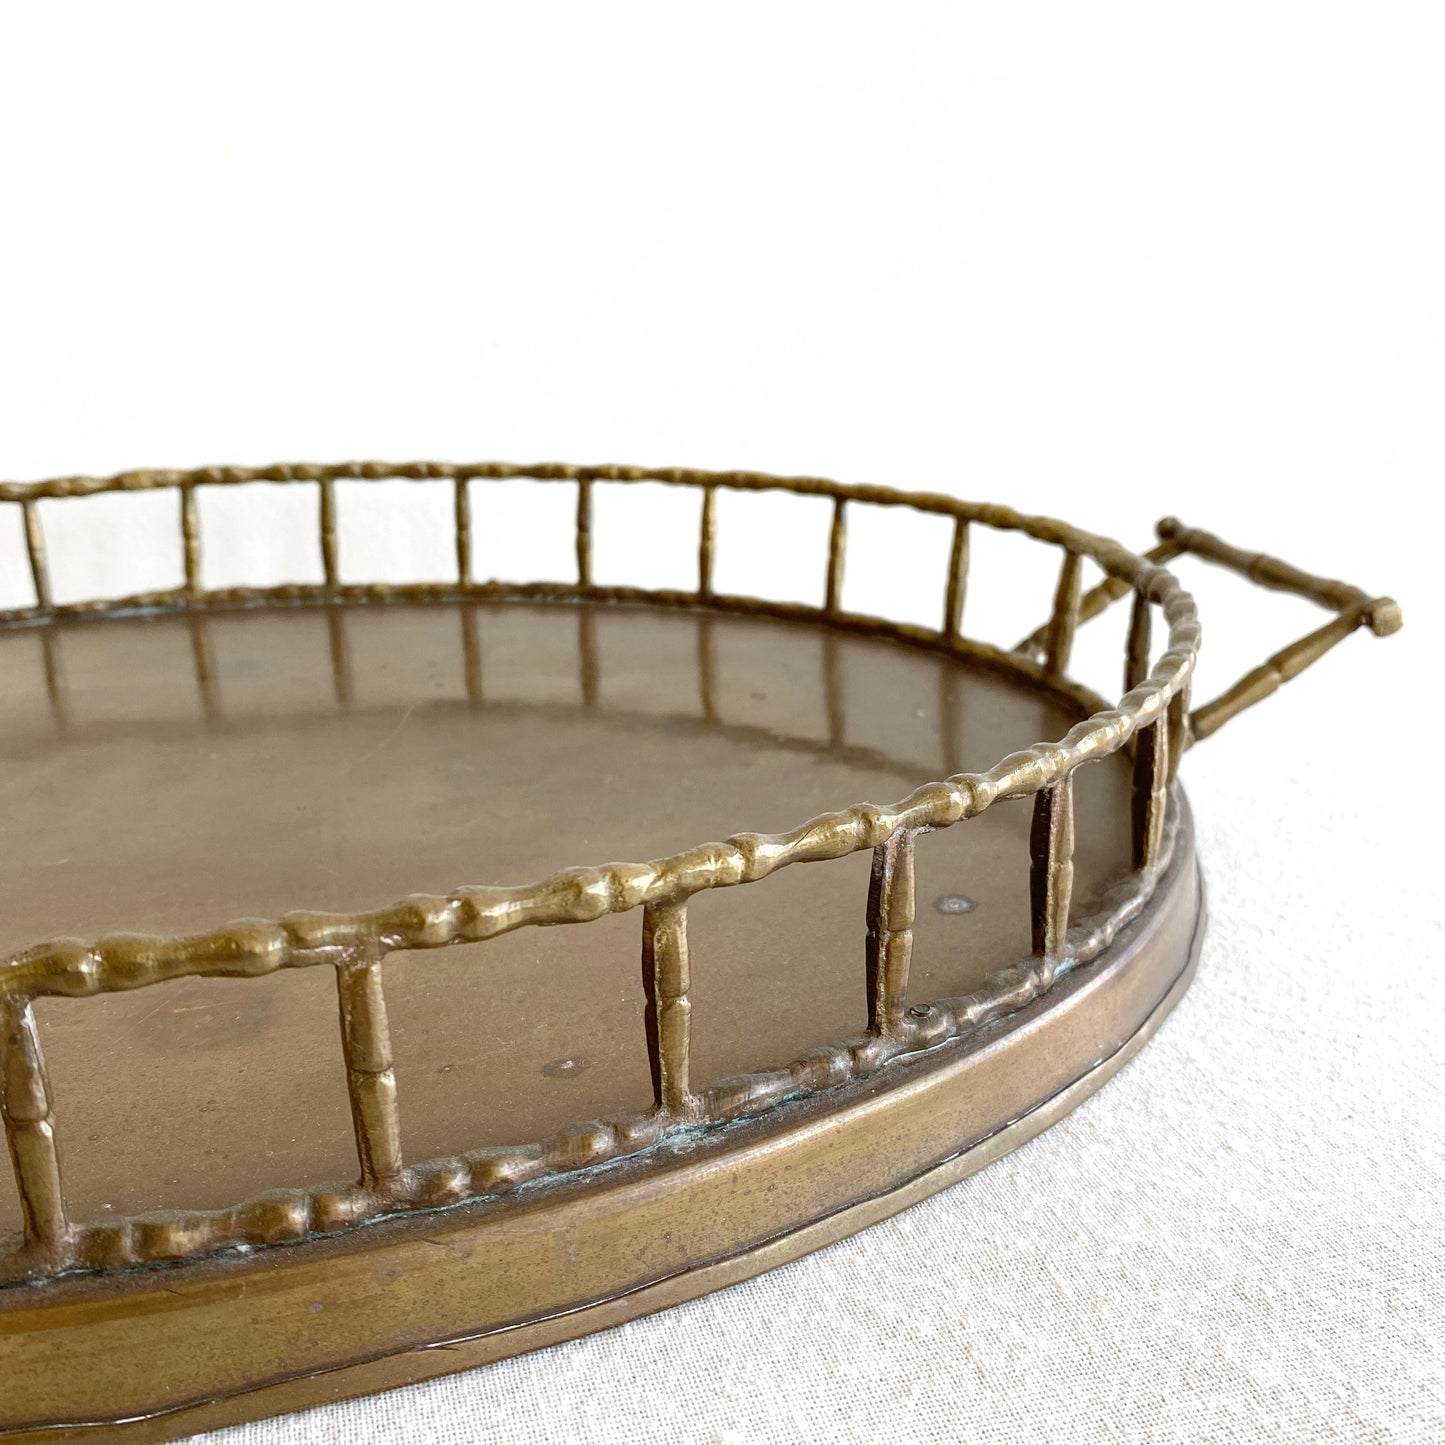 XL Vintage Brass Tray with Rail